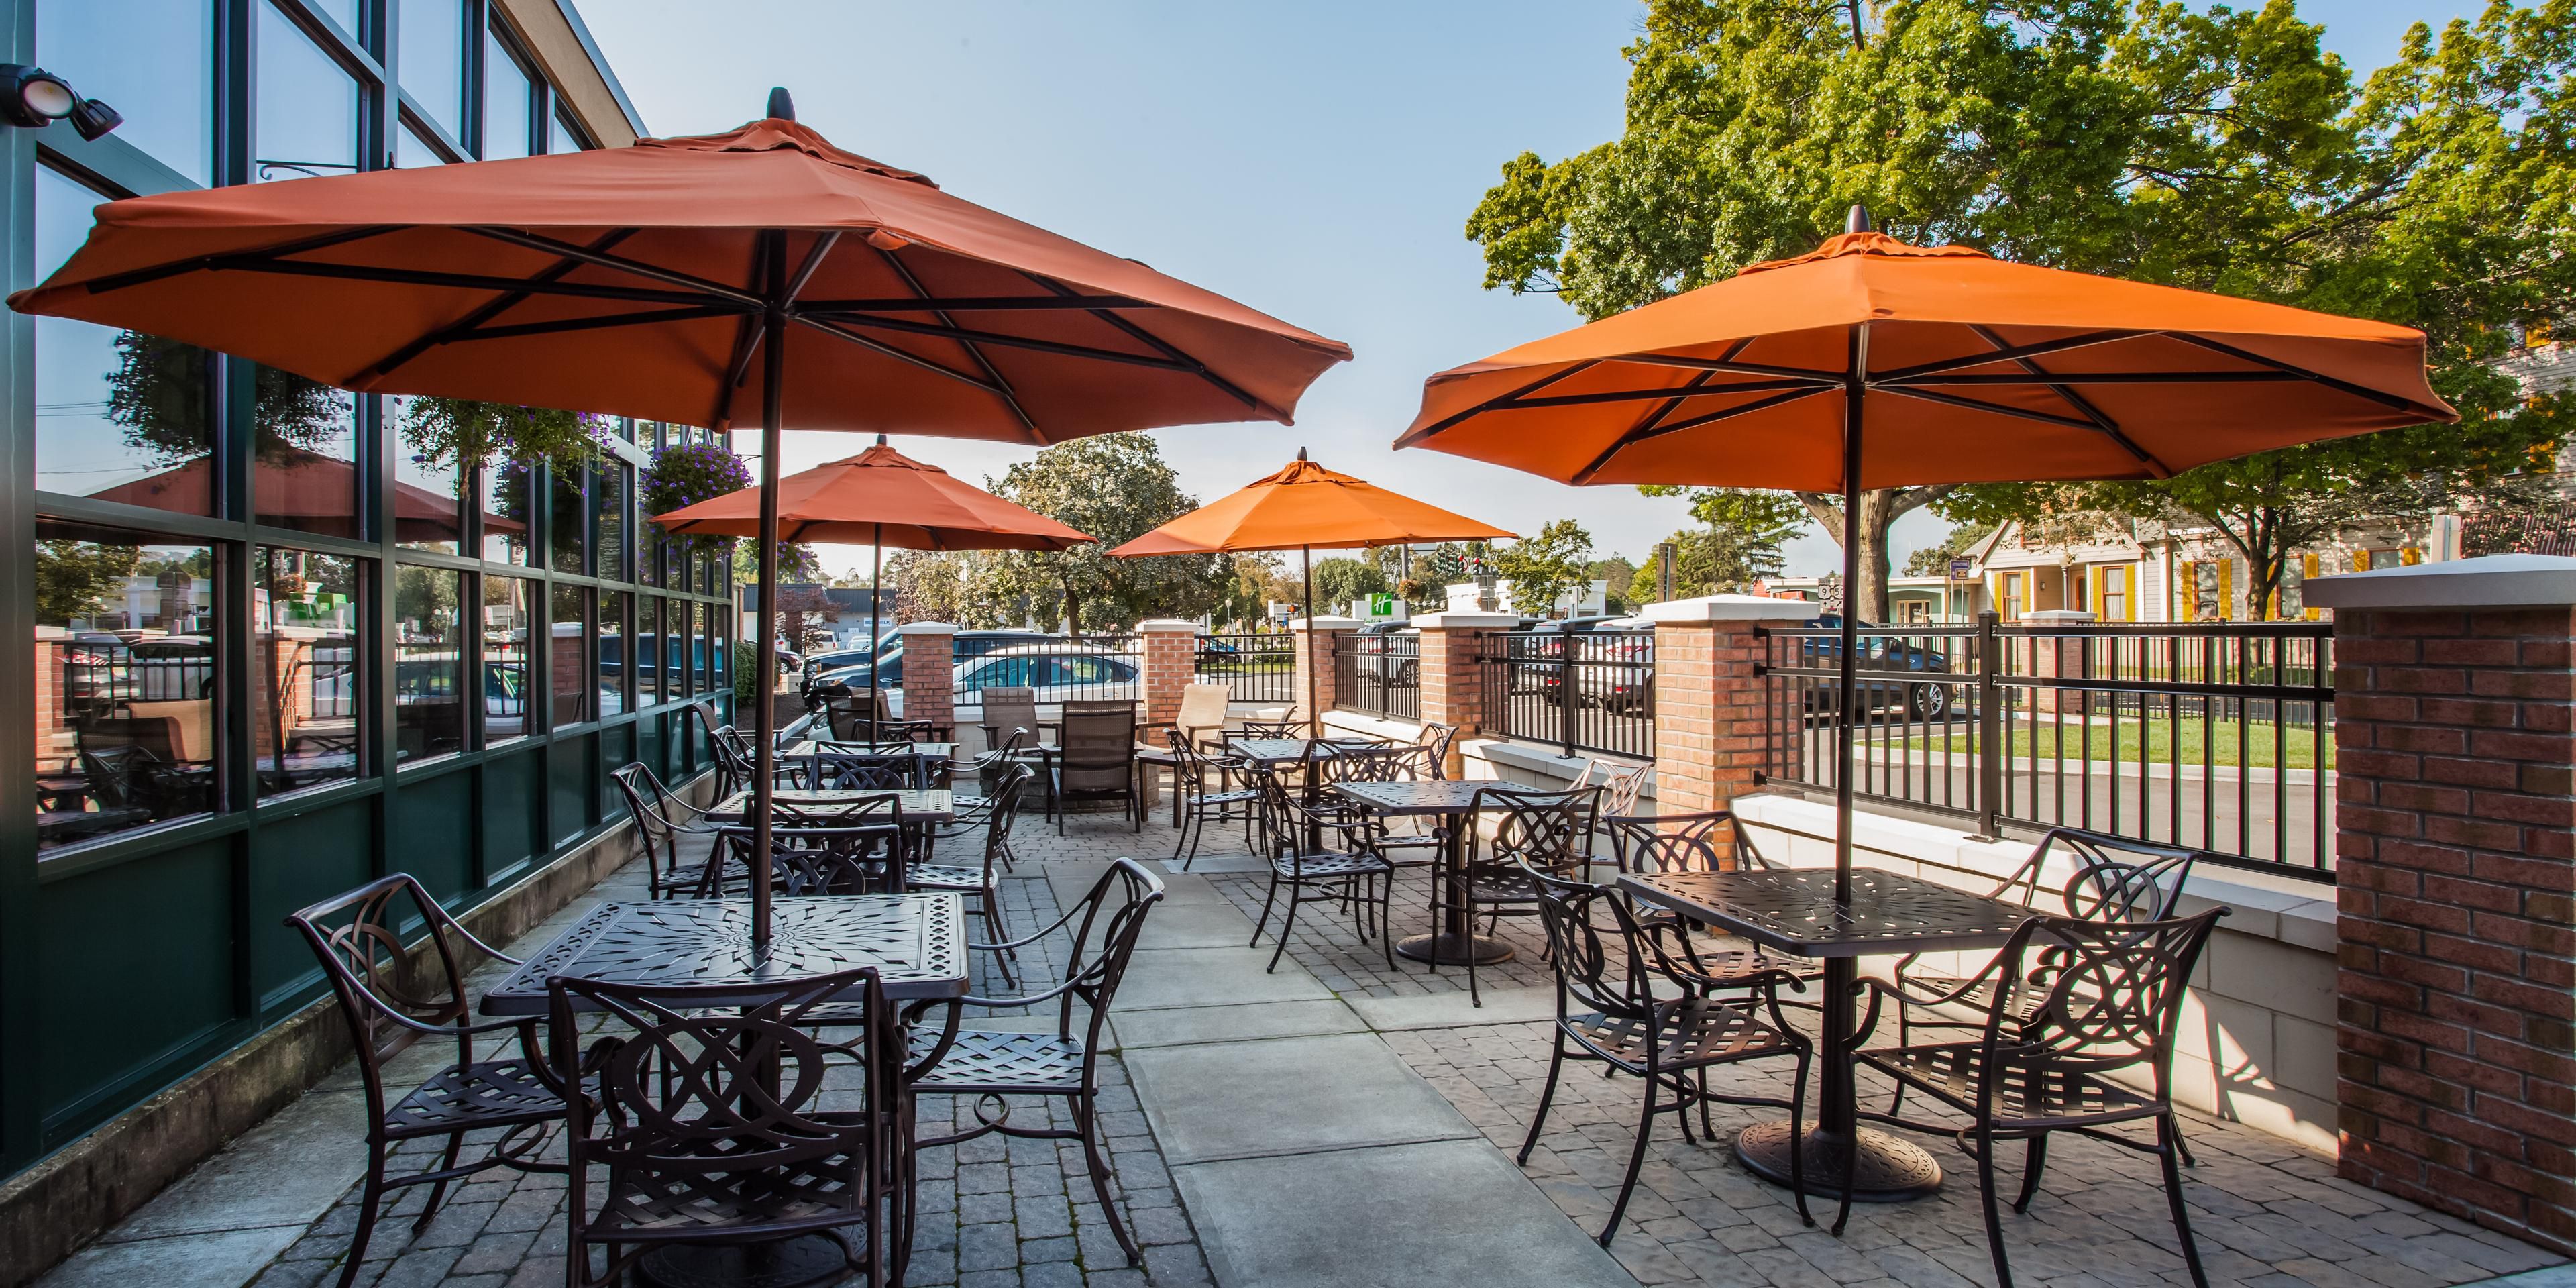 Enjoy our seasonal outdoor dining patio with firepit!